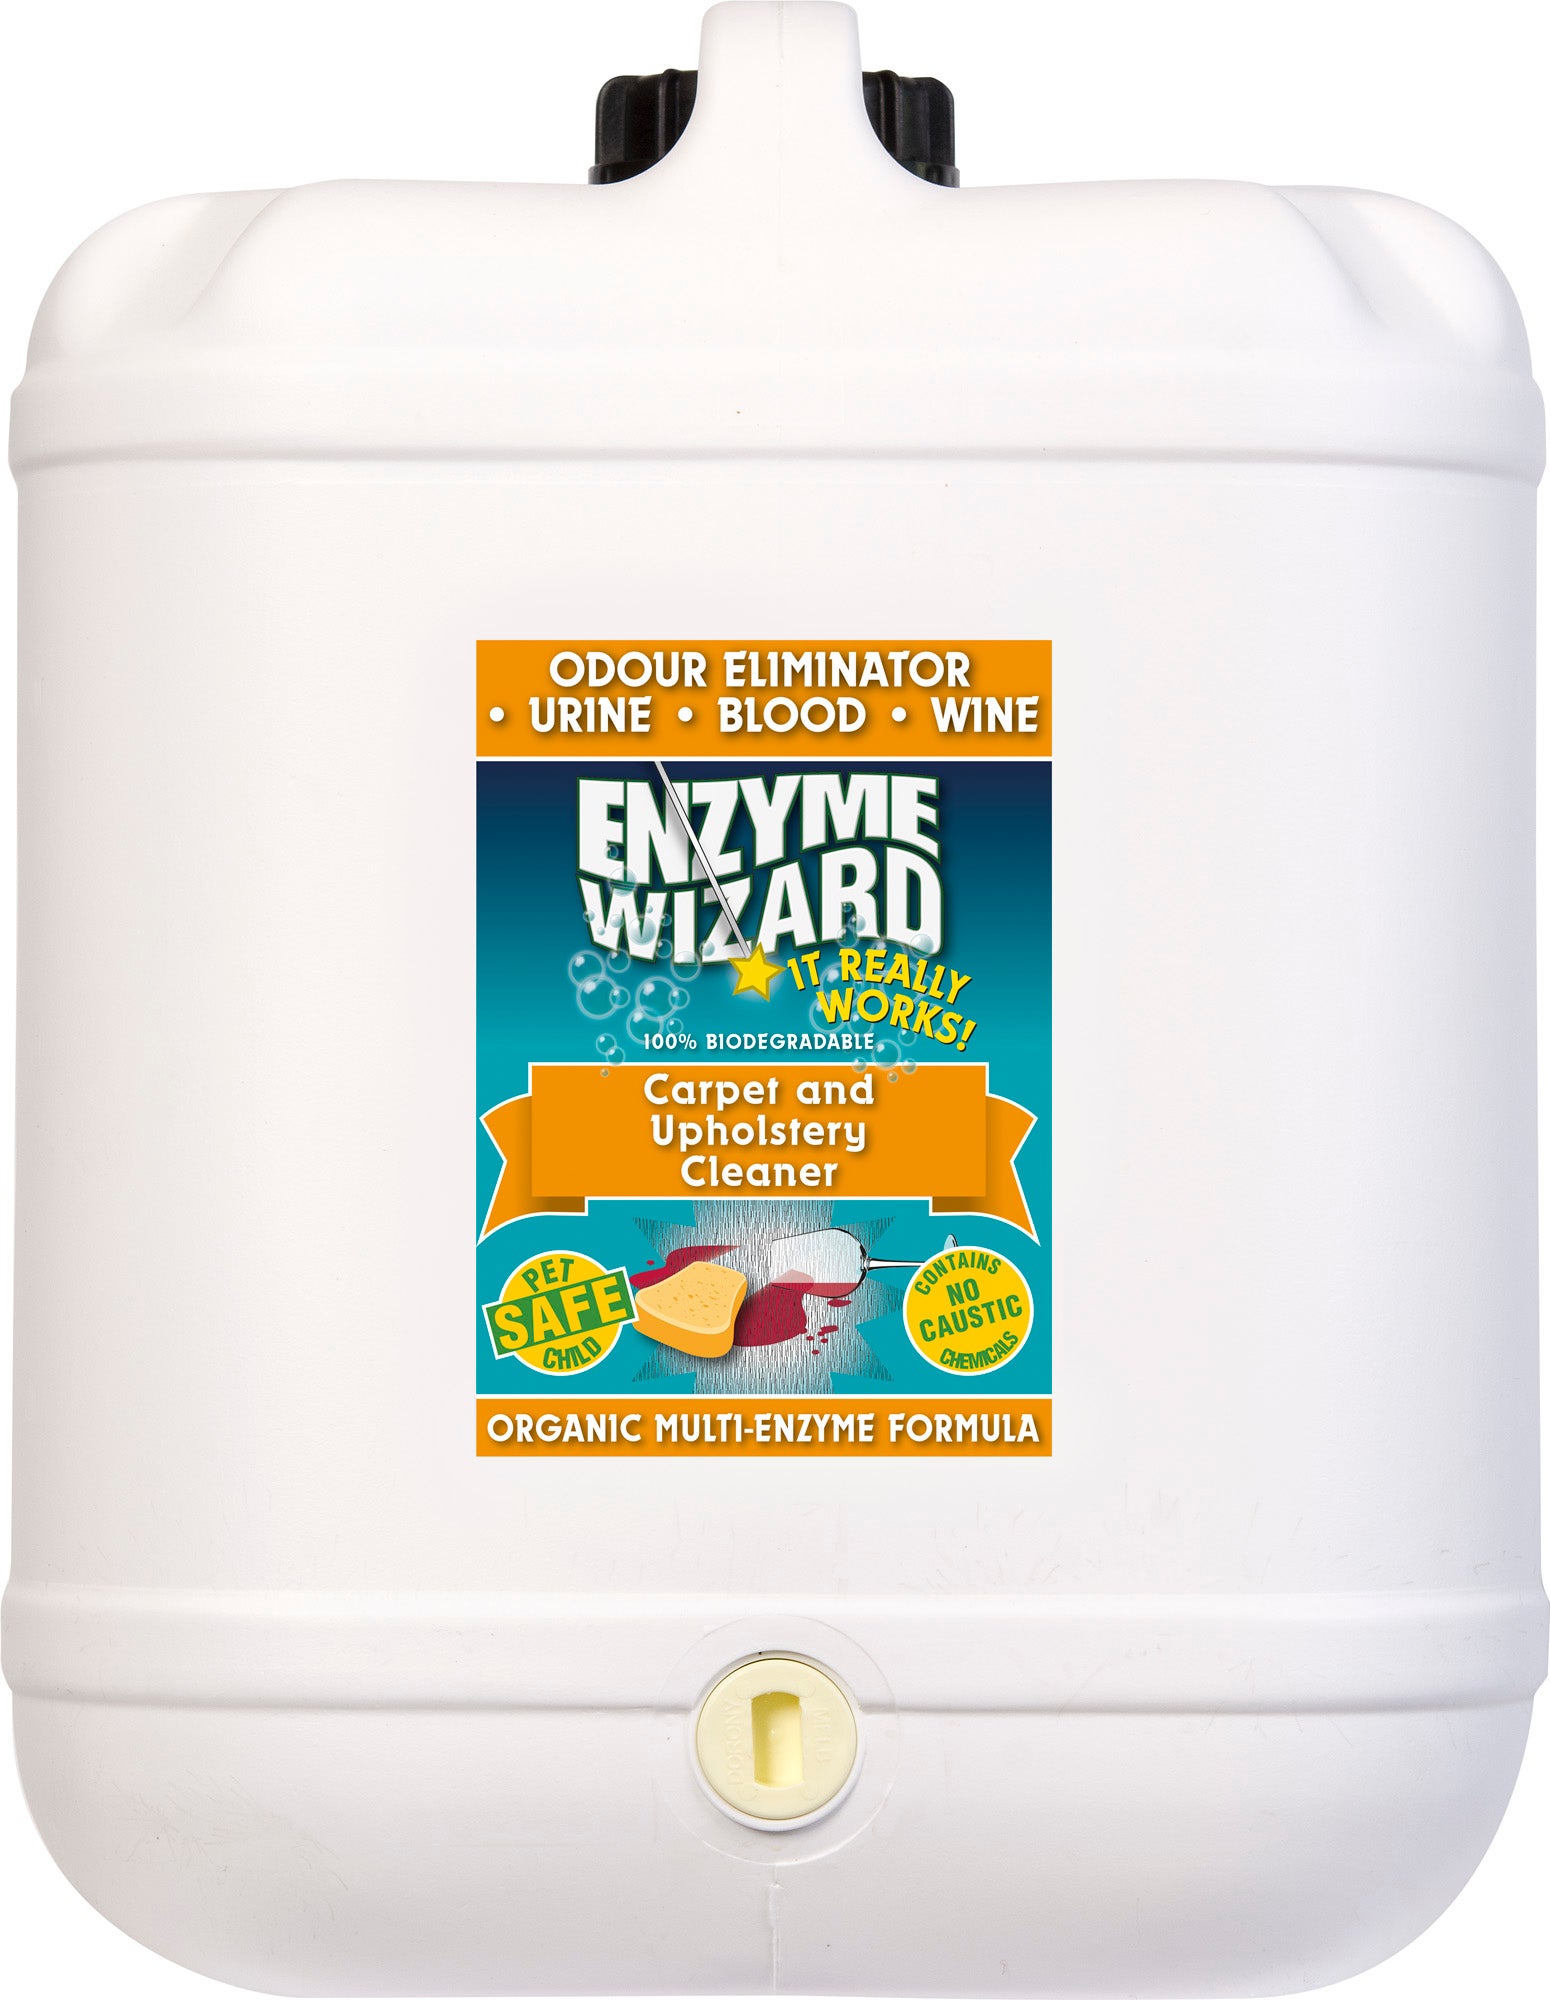 Enzyme Wizard Carpet and Upholstery Multi-Enzyme Cleaner